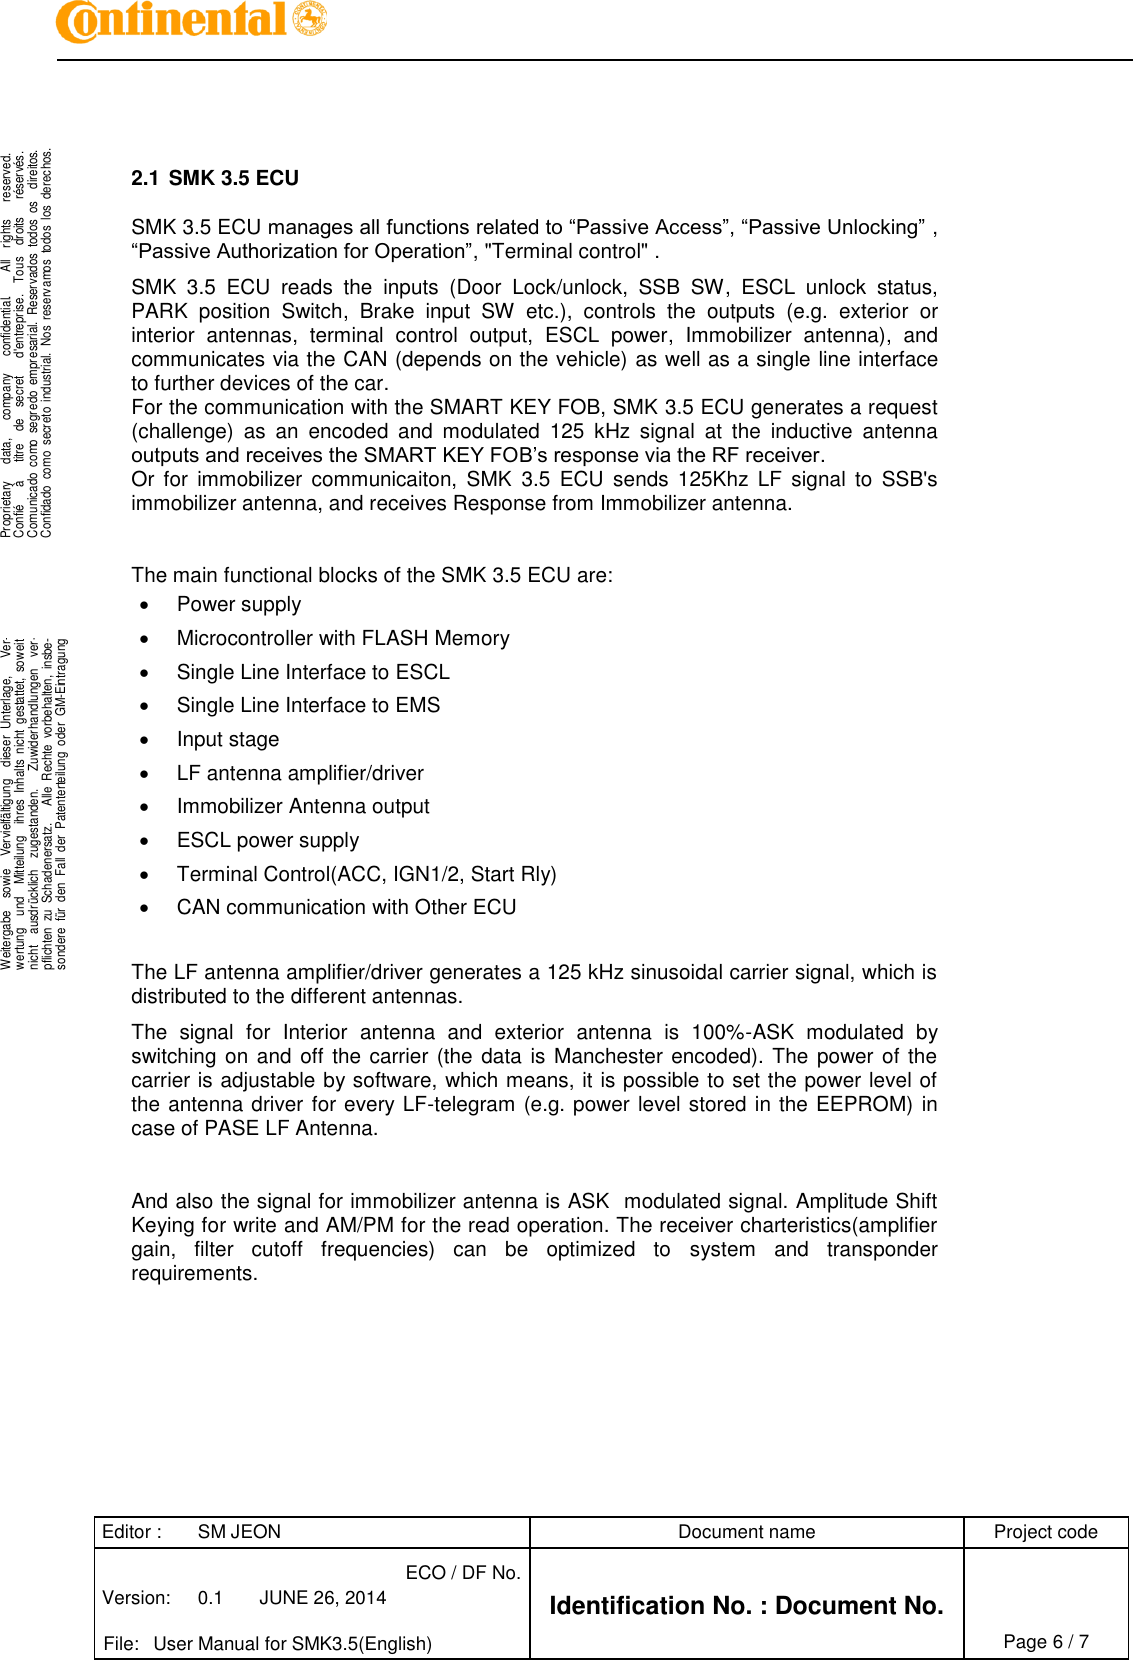 Editor : SM JEON Document name Project code Version: 0.1 JUNE 26, 2014 ECO / DF No. Identification No. : Document No.   File: User Manual for SMK3.5(English) Page 6 / 7     .Proprietary     data,      company      confidential.       All    rights      reserved.Confié      à      titre    de    secret      d&apos;entreprise.    Tous    droits      réservés.Comunicado  como  segredo  empresarial.  Reservados  todos  os    direitos.Confidado  como  secreto  industrial.  Nos  reservamos  todos  los  derechos. . .Weitergabe    sowie    Vervielfältigung    dieser  Unterlage,      Ver-wertung    und    Mitteilung    ihres  Inhalts  nicht  gestattet,  soweitnicht    ausdrücklich    zugestanden.      Zuwiderhandlungen    ver-pflichten  zu  Schadenersatz.      Alle  Rechte  vorbehalten,  insbe-sondere  für  den  Fall  der  Patenterteilung  oder  GM-Eintragung..    2.1 SMK 3.5 ECU  SMK 3.5 ECU manages all functions related to “Passive Access”, “Passive Unlocking” , “Passive Authorization for Operation”, &quot;Terminal control&quot; .  SMK  3.5  ECU  reads  the  inputs  (Door  Lock/unlock,  SSB  SW,  ESCL  unlock  status, PARK  position  Switch,  Brake  input  SW  etc.),  controls  the  outputs  (e.g.  exterior  or interior  antennas,  terminal  control  output,  ESCL  power,  Immobilizer  antenna),  and communicates via the CAN (depends on the vehicle) as well as a single line interface to further devices of the car.  For the communication with the SMART KEY FOB, SMK 3.5 ECU generates a request (challenge)  as  an  encoded  and  modulated  125  kHz  signal  at  the  inductive  antenna outputs and receives the SMART KEY FOB’s response via the RF receiver. Or  for  immobilizer  communicaiton,  SMK  3.5  ECU  sends  125Khz  LF  signal  to  SSB&apos;s immobilizer antenna, and receives Response from Immobilizer antenna.   The main functional blocks of the SMK 3.5 ECU are:   Power supply   Microcontroller with FLASH Memory   Single Line Interface to ESCL   Single Line Interface to EMS   Input stage   LF antenna amplifier/driver   Immobilizer Antenna output   ESCL power supply   Terminal Control(ACC, IGN1/2, Start Rly)   CAN communication with Other ECU  The LF antenna amplifier/driver generates a 125 kHz sinusoidal carrier signal, which is distributed to the different antennas. The  signal  for  Interior  antenna  and  exterior  antenna  is  100%-ASK  modulated  by switching on and off the carrier (the data is Manchester encoded). The  power of the carrier is adjustable by software, which means, it is possible to set the power level of the antenna driver for every LF-telegram (e.g. power level stored in the EEPROM)  in case of PASE LF Antenna.   And also the signal for immobilizer antenna is ASK  modulated signal. Amplitude Shift Keying for write and AM/PM for the read operation. The receiver charteristics(amplifier gain,  filter  cutoff  frequencies)  can  be  optimized  to  system  and  transponder requirements.           